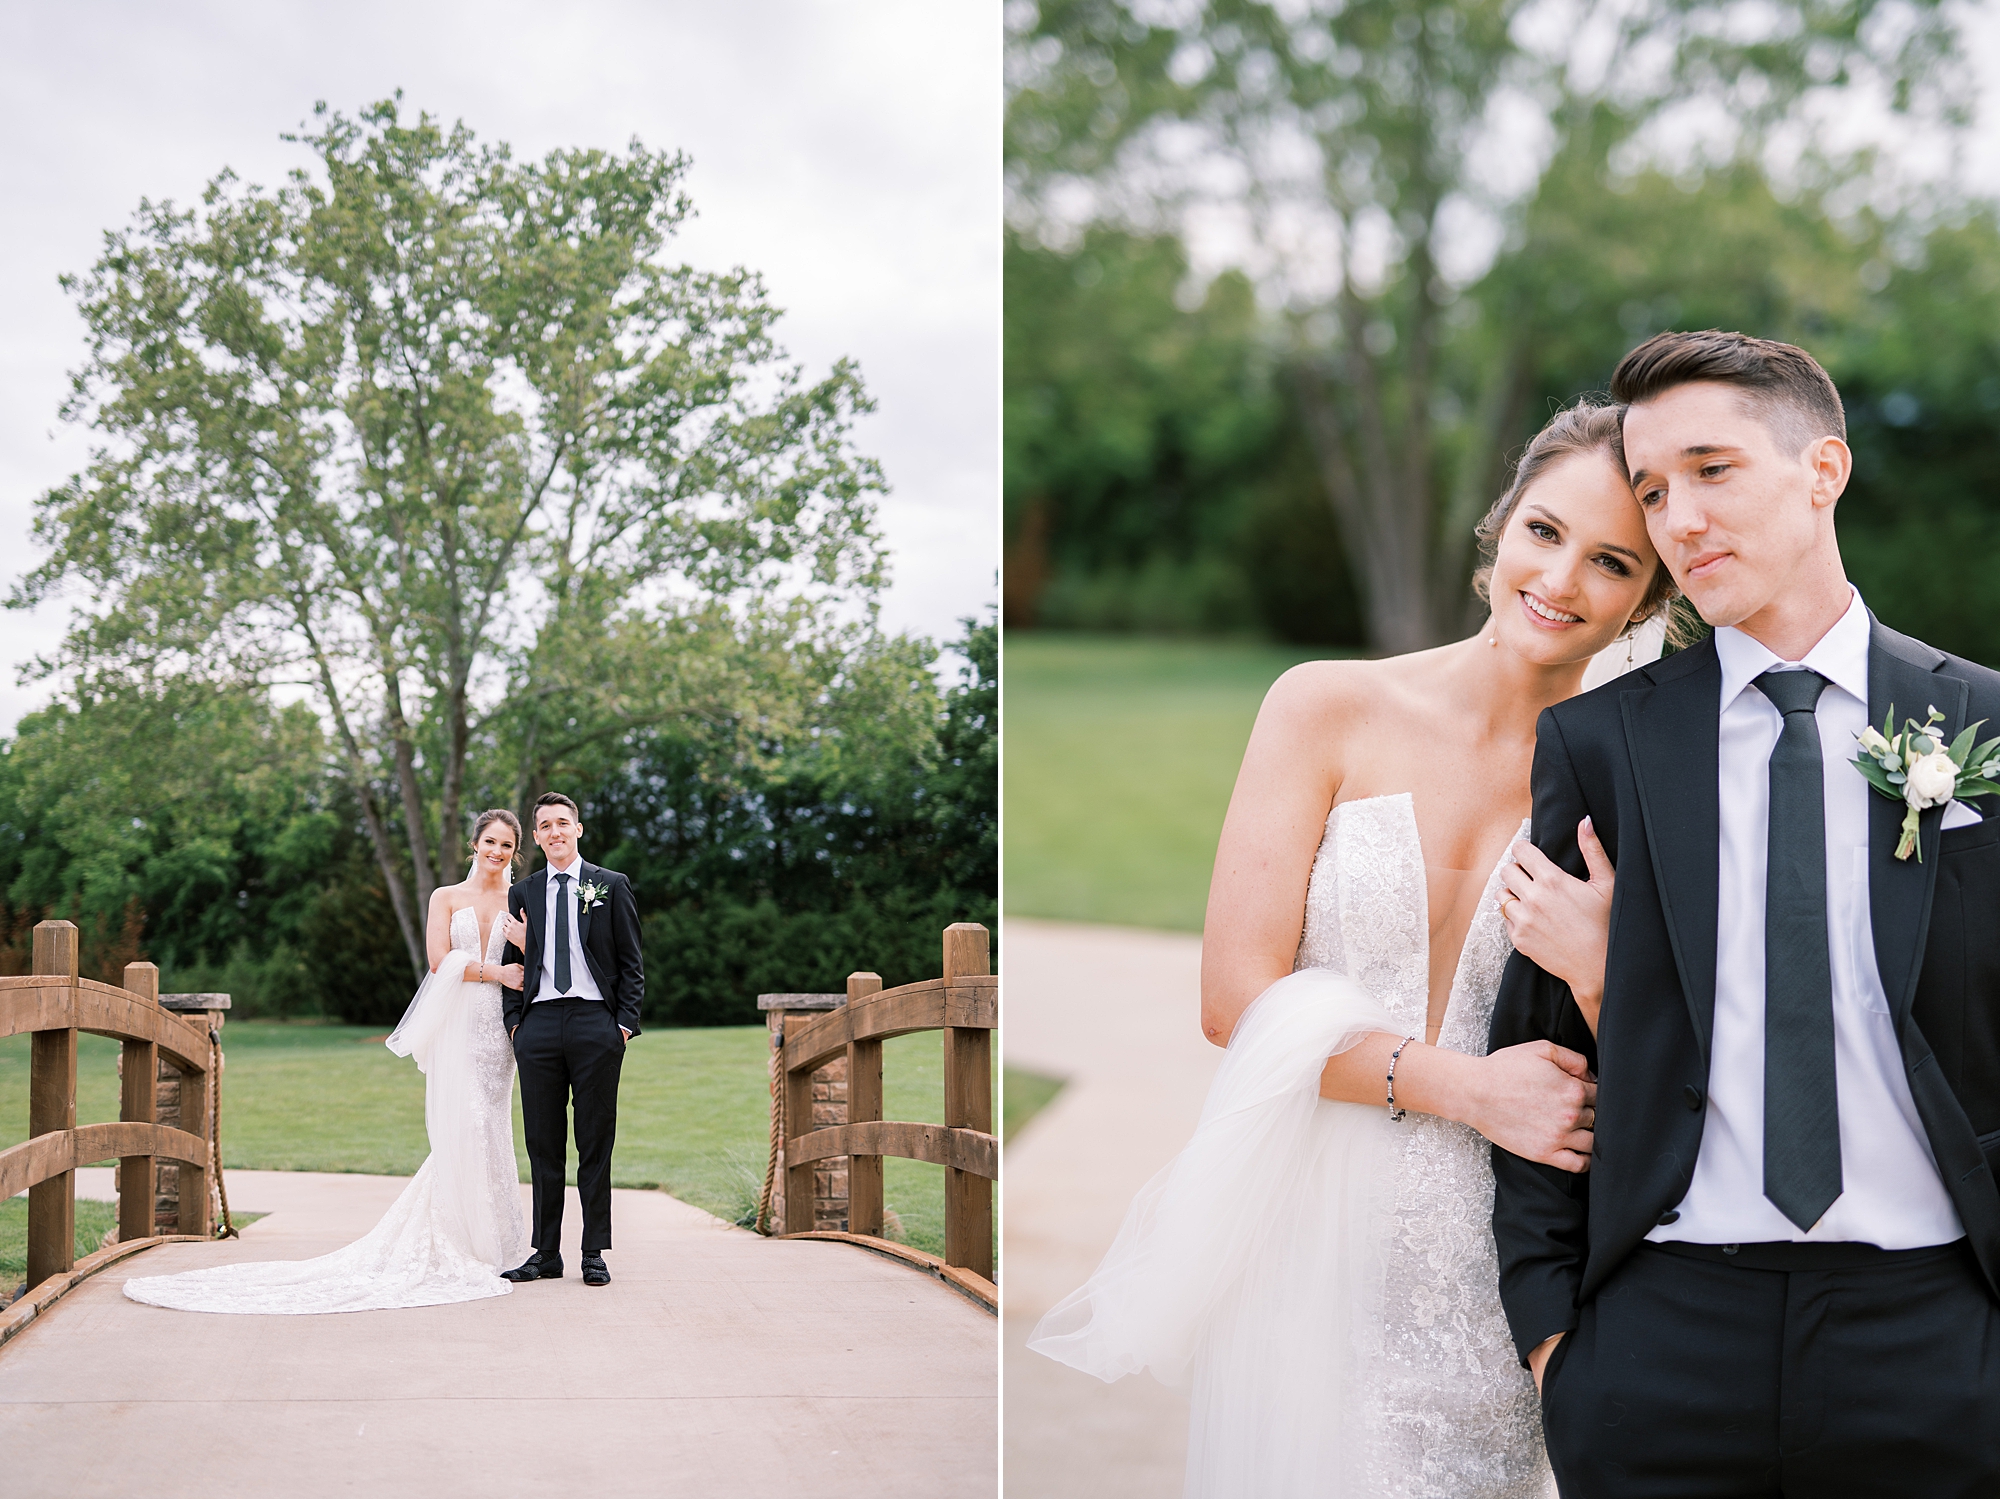 timeless wedding portraits from Dreamy Summer Wedding at The Barn at Sycamore Farms